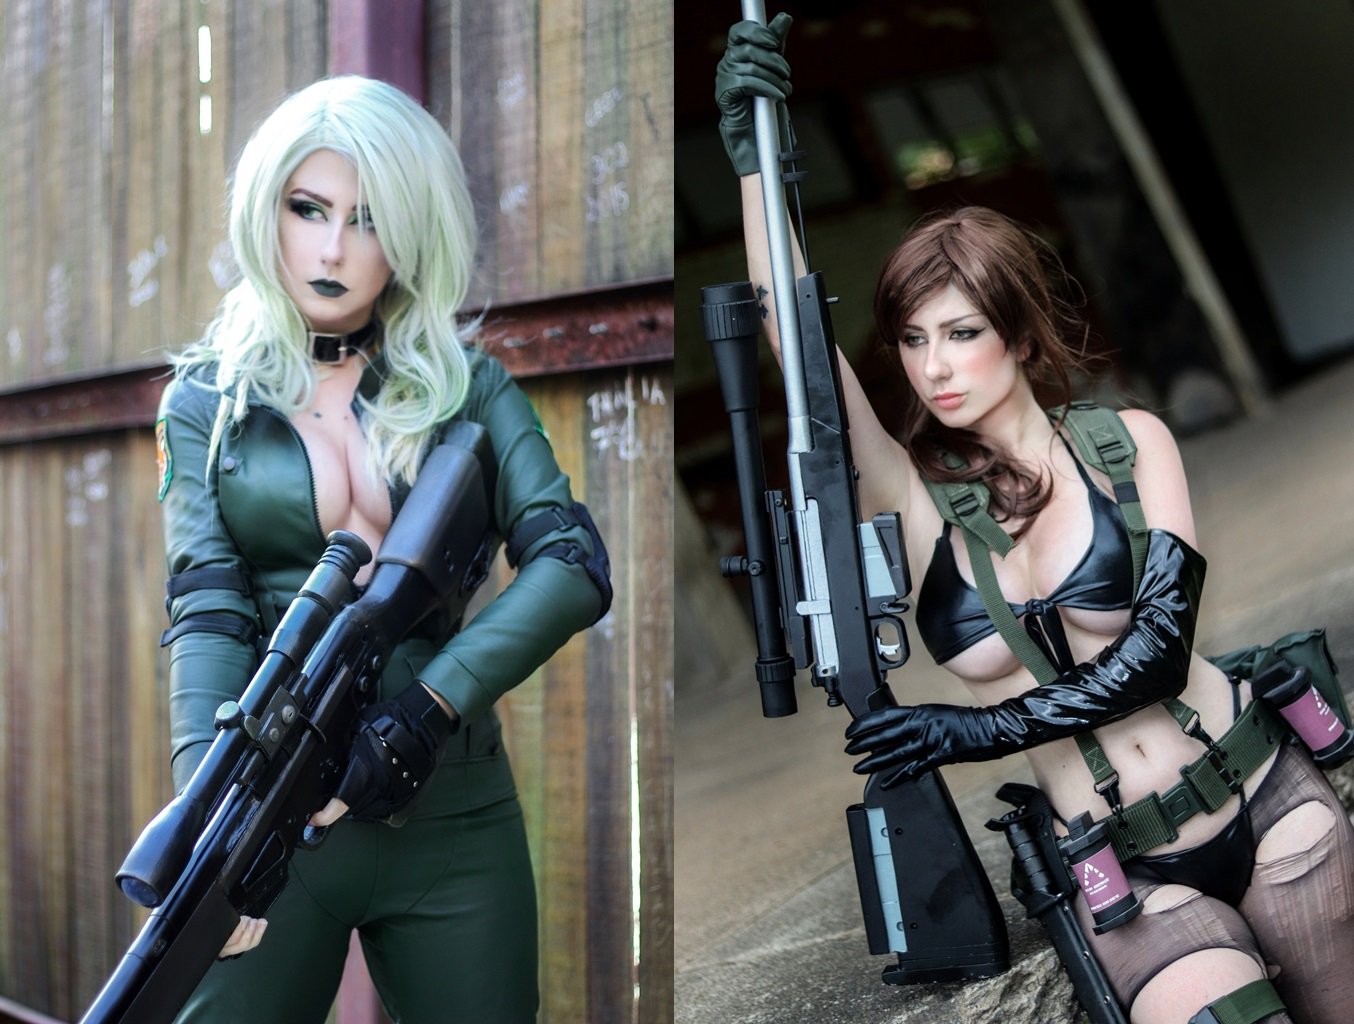 Sniper Wolf or Quiet?Like ► for Sniper Wolf Retweet ► for Quiet OR BOTH? id...